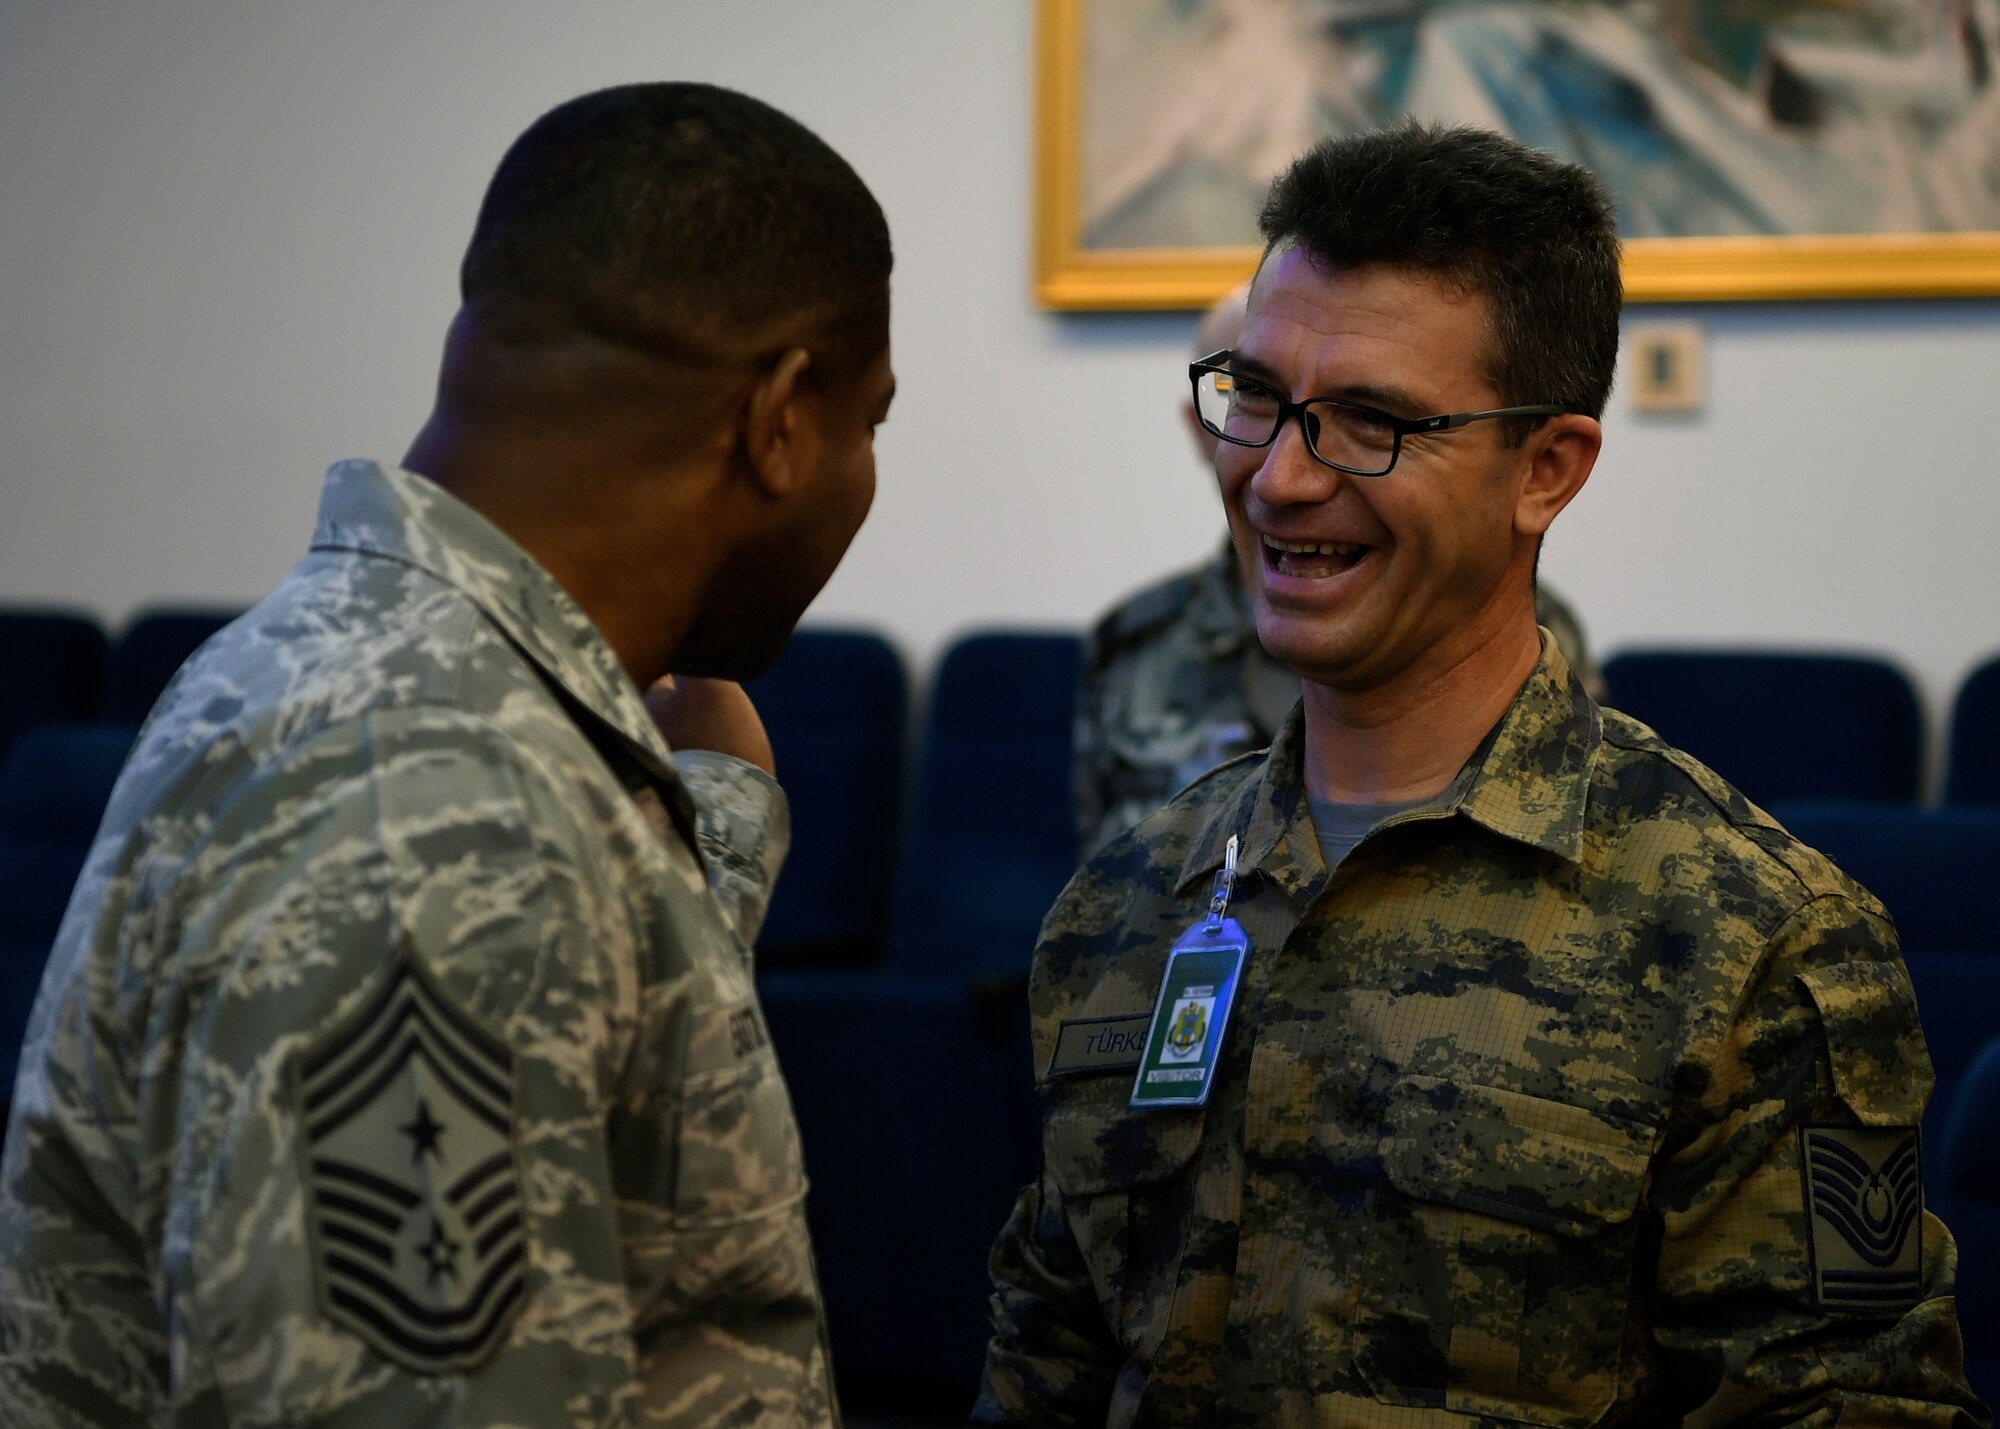 Chief Master Sgt. of the Turkish air force Ibrahim Türker and U.S. Air Force Chief Master Sgt. Phillip L. Easton, United States Air Forces in Europe and Africa command chief, talk during the Romanian air force’s International Senior Enlisted Leader Visit at Bucharest, Romania, July 10, 2018